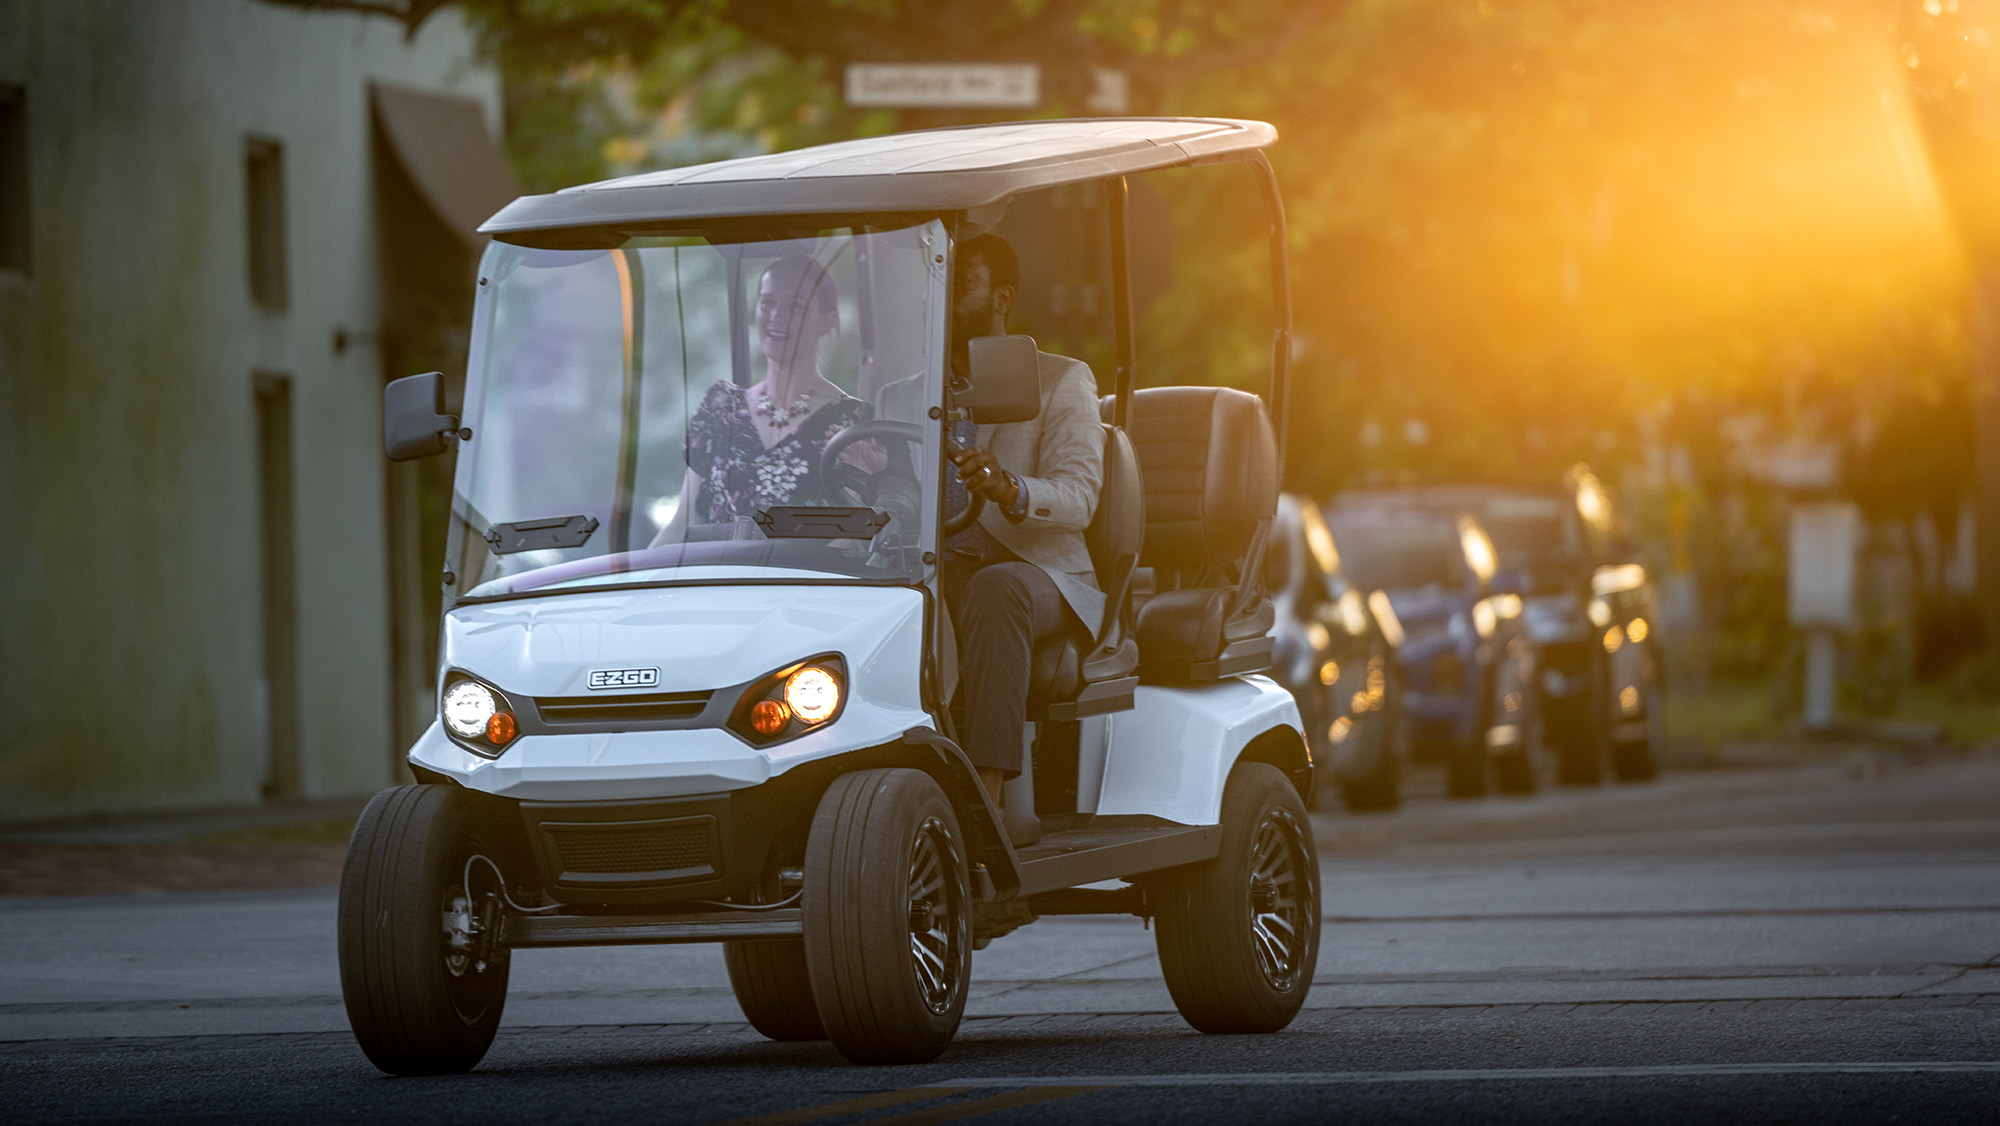 Where can I drive my LSV / NEV golf cart?